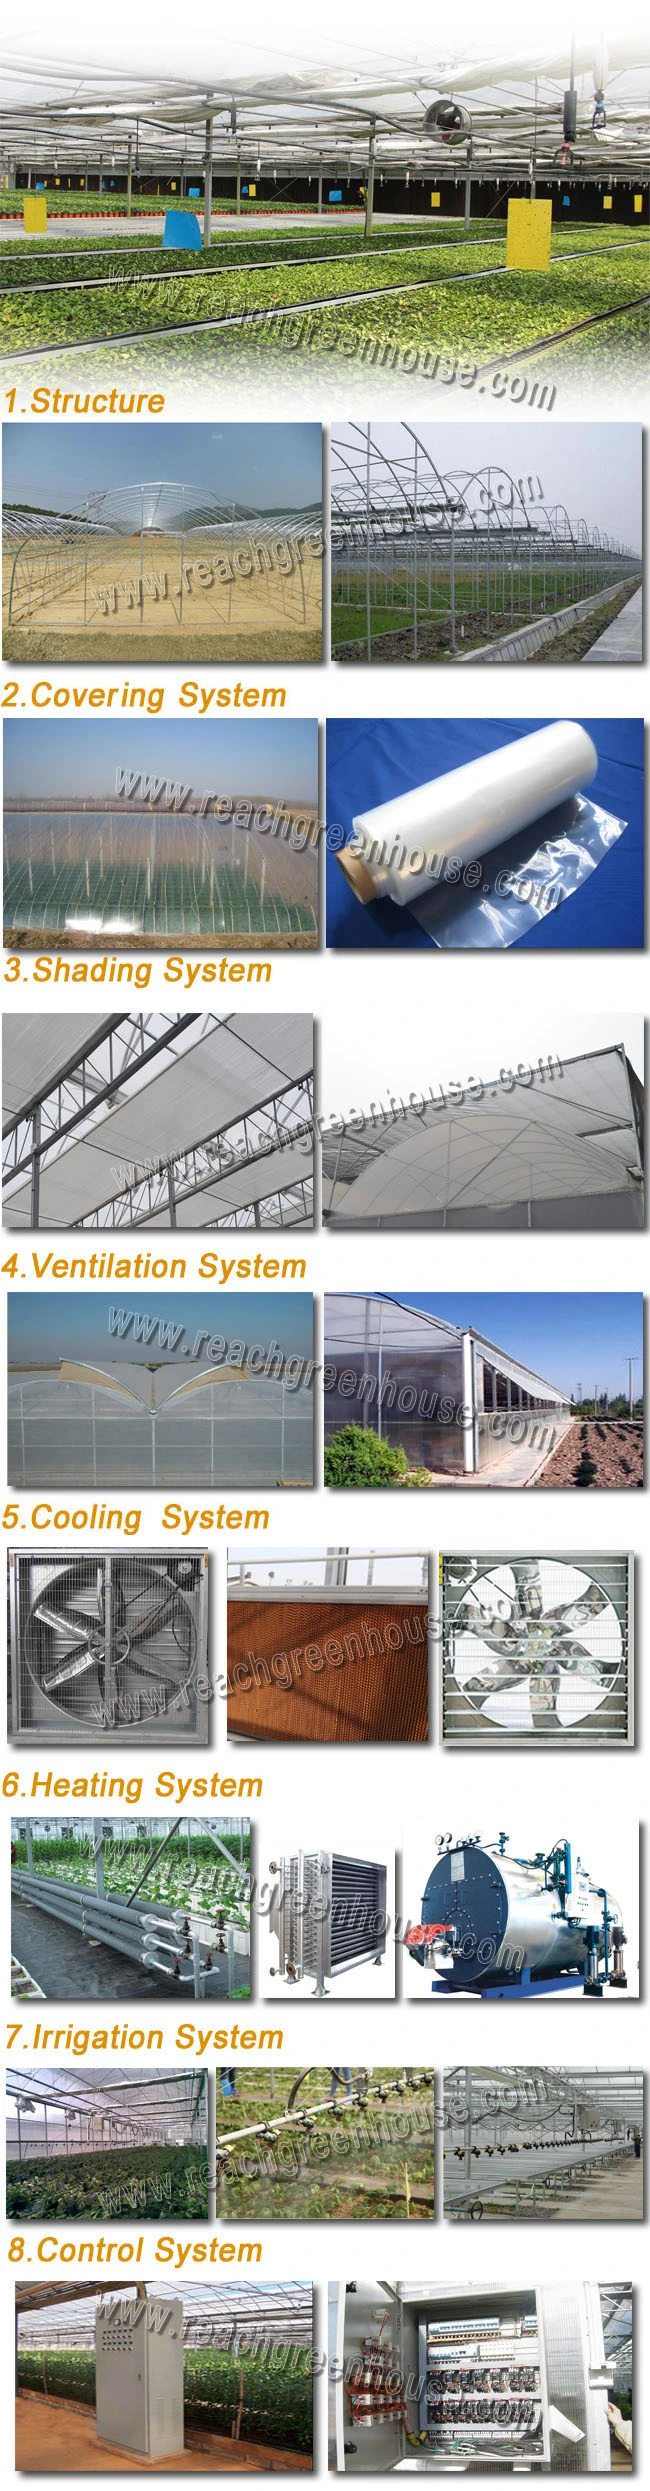 Muti-Span Tunnel Po Film Plastic Cover Vegetables Greenhouse with Shading System